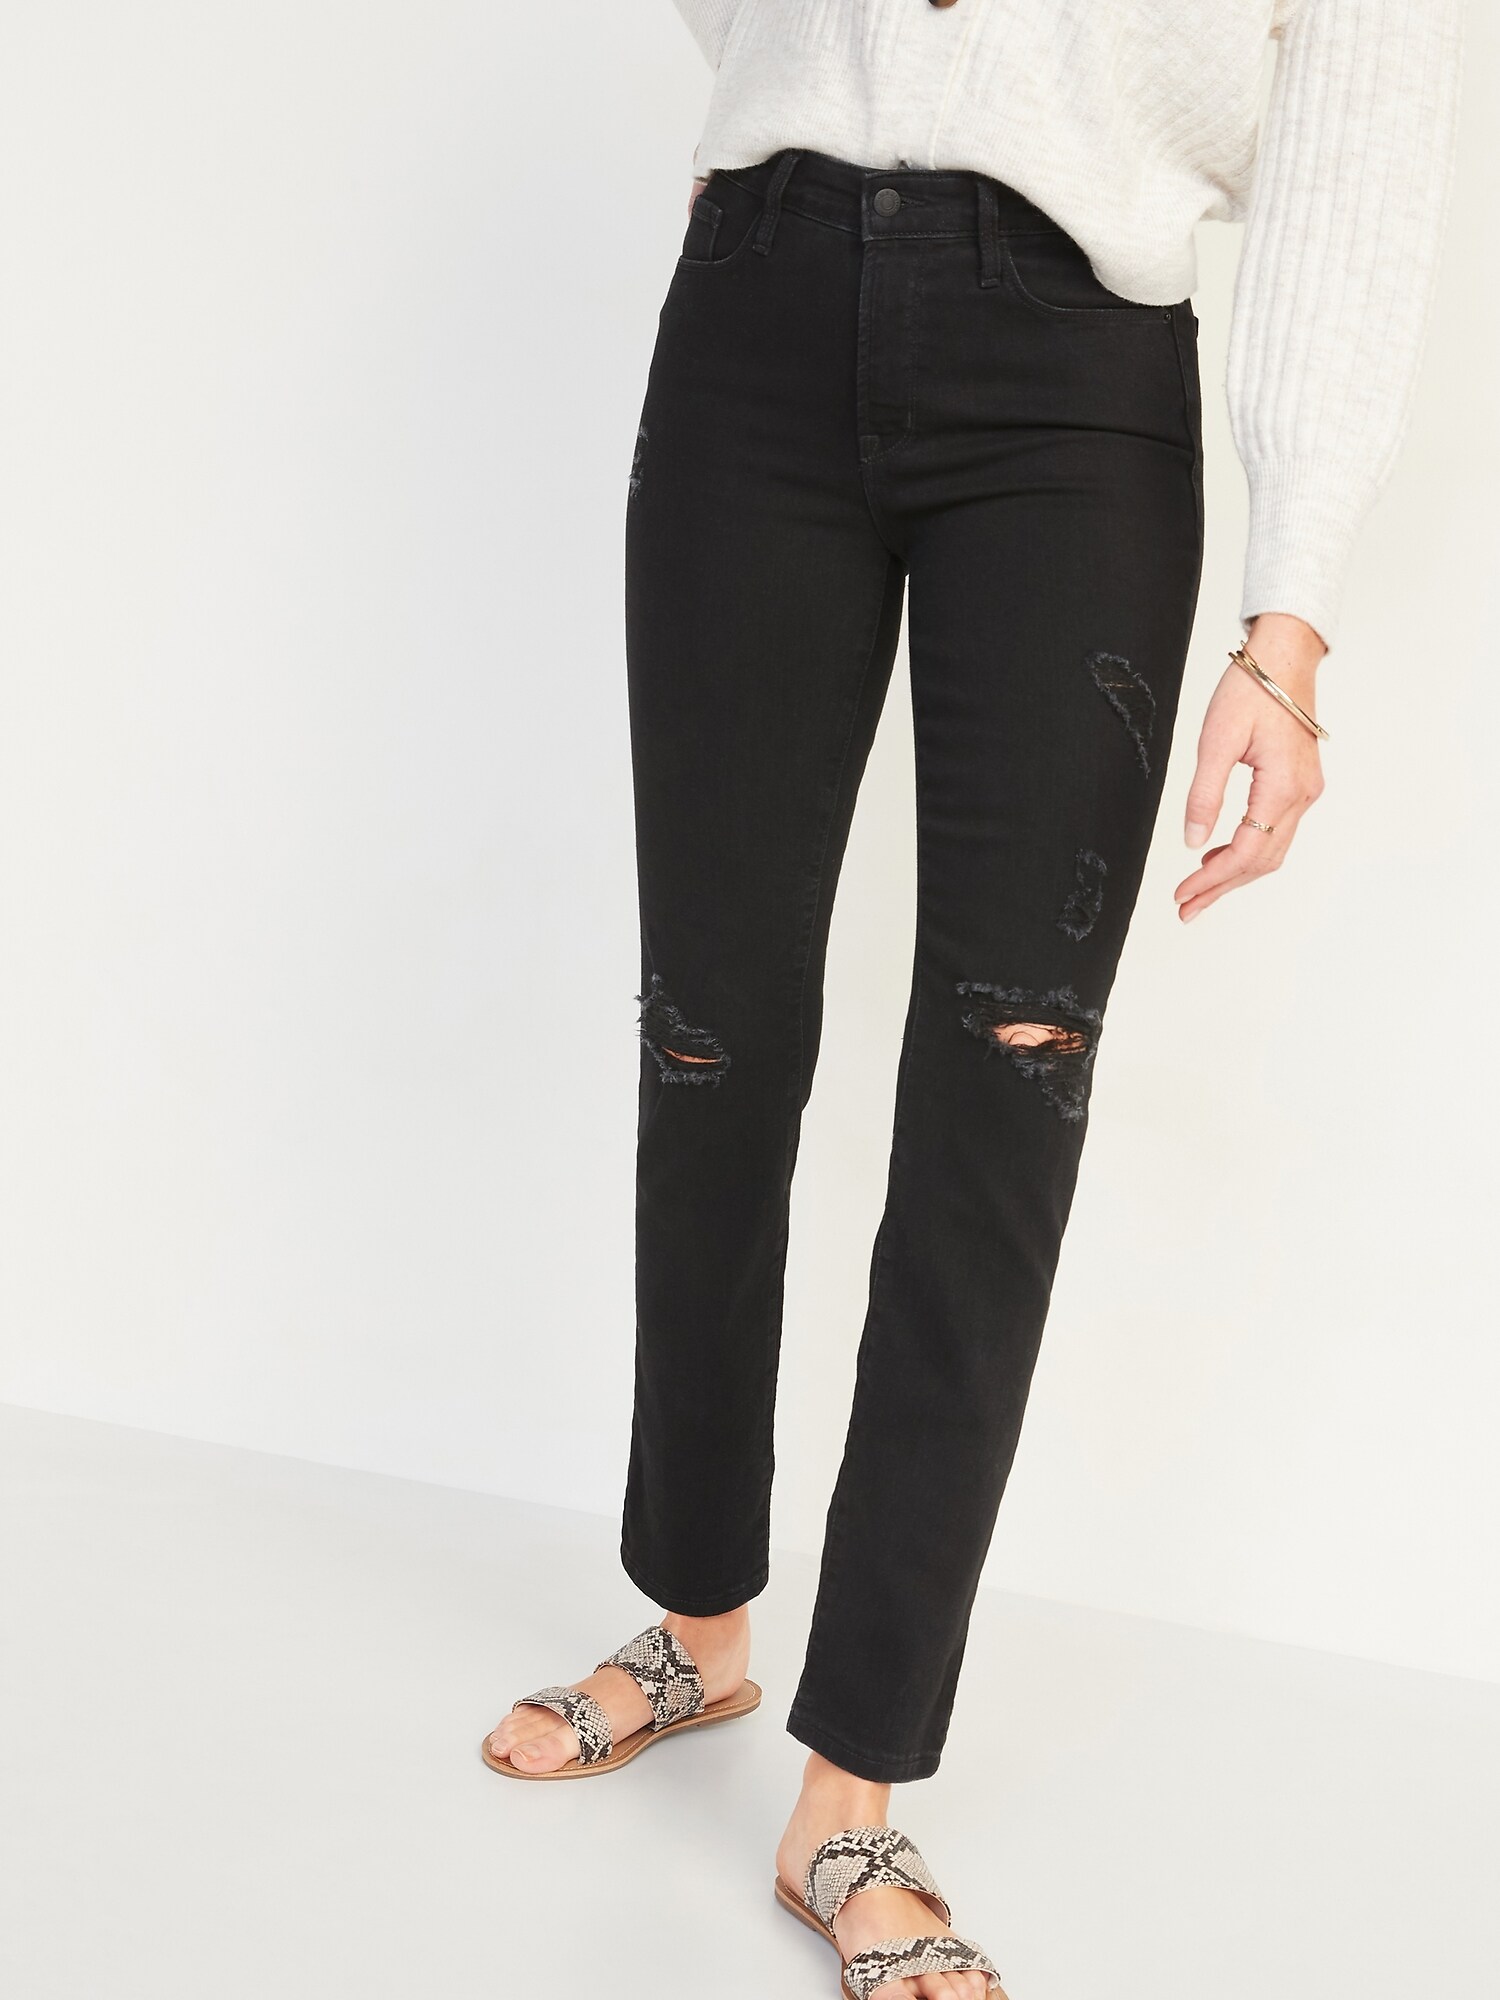 Women's Jeans at Search By Inseam